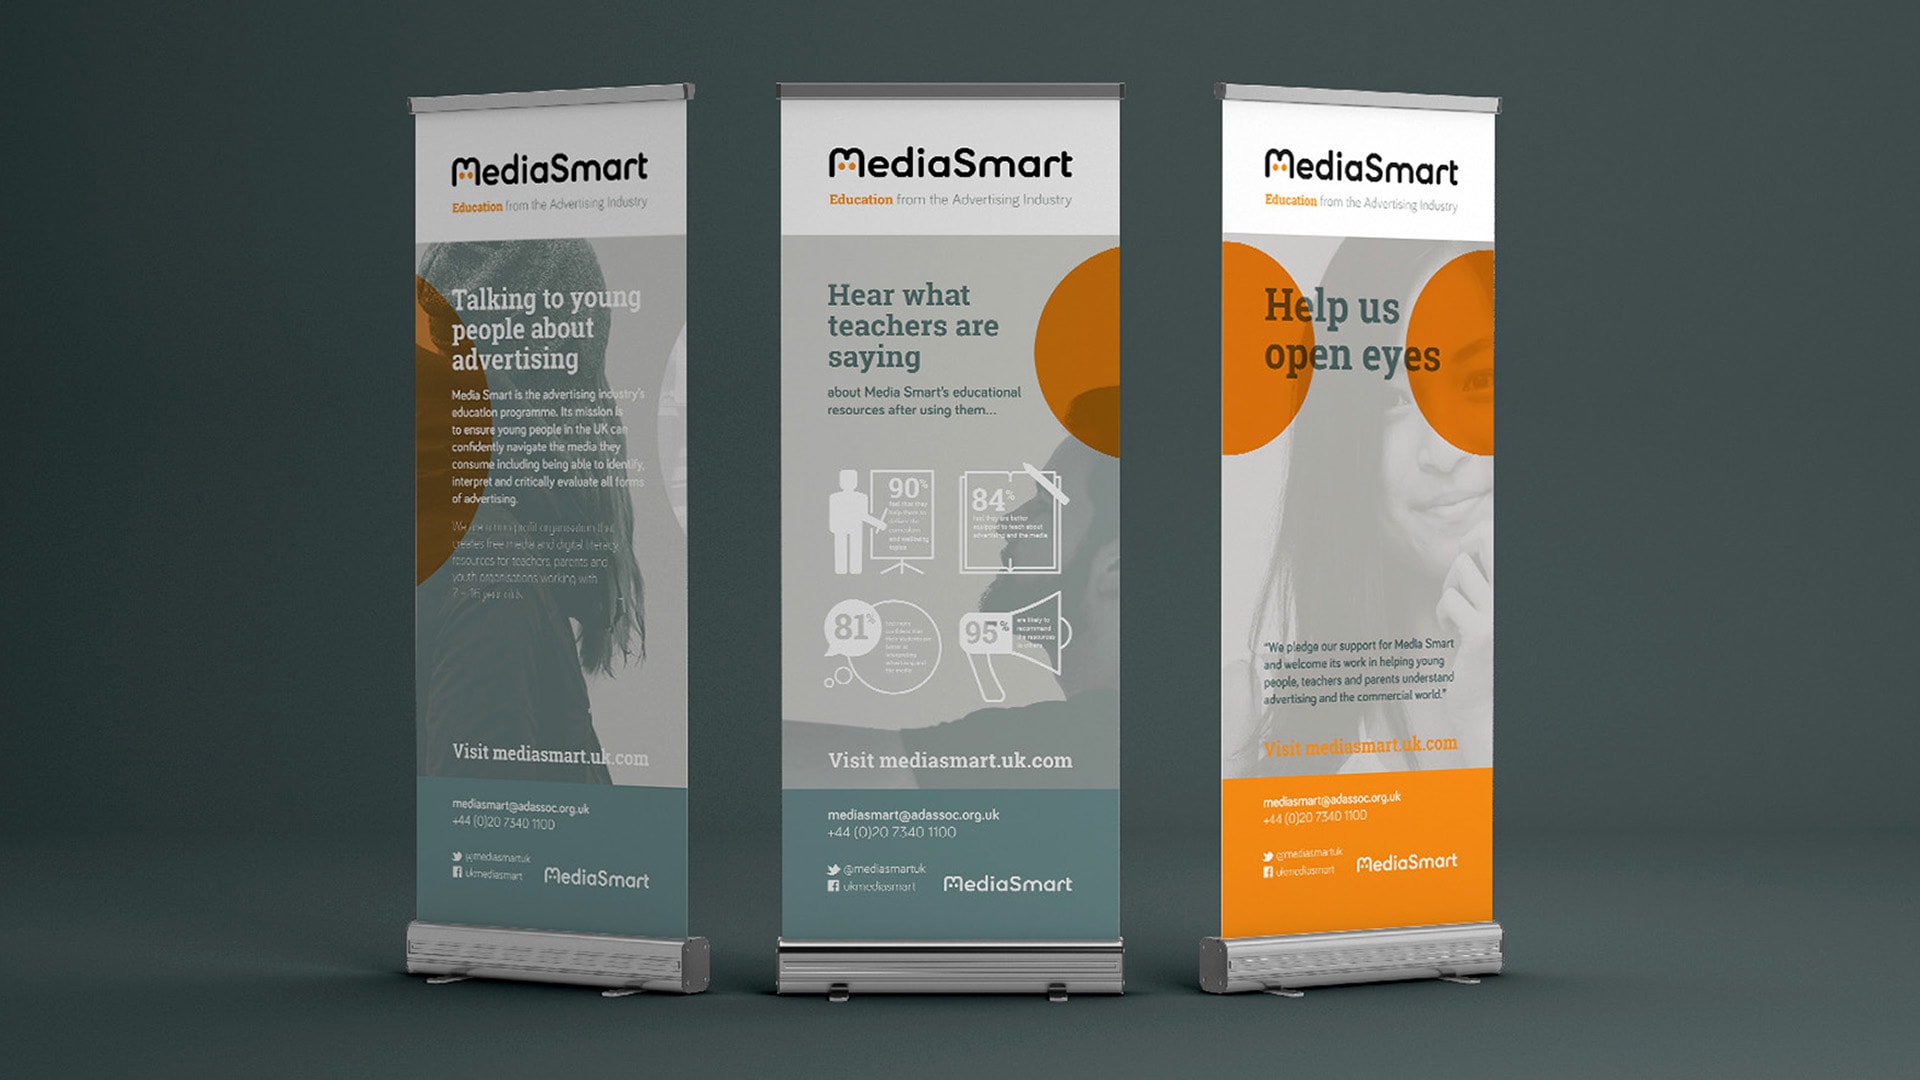 A photograph of three MediaSmart Event Roller Banners displayed in a line with a grey background.